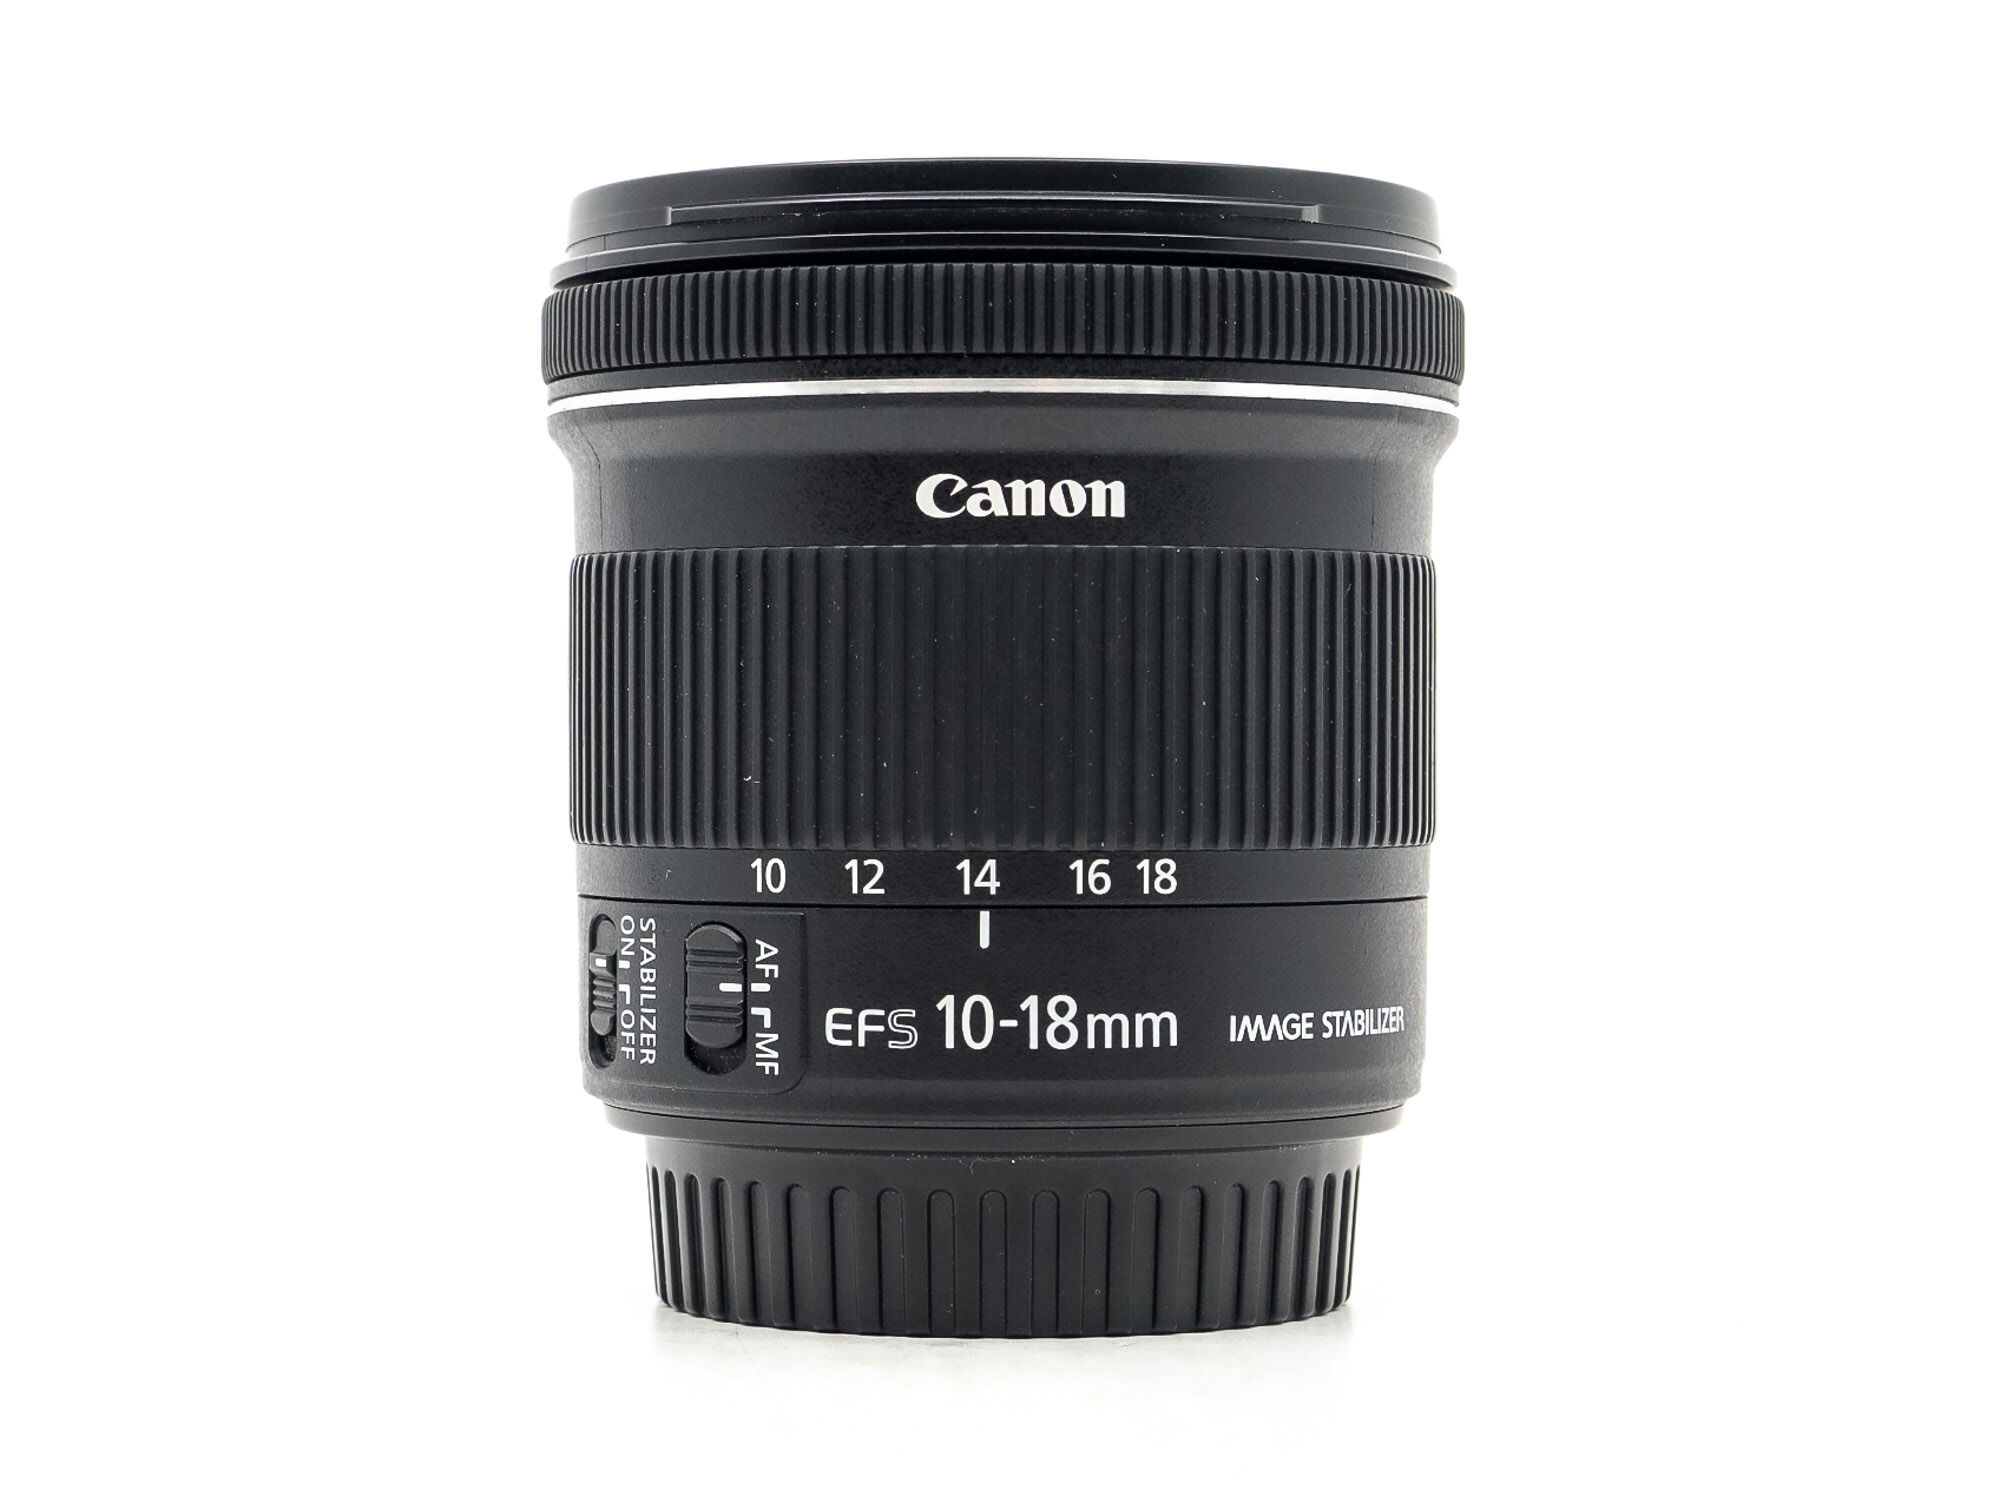 Canon EF-S 10-18mm f/4.5-5.6 IS STM (Condition: Excellent)